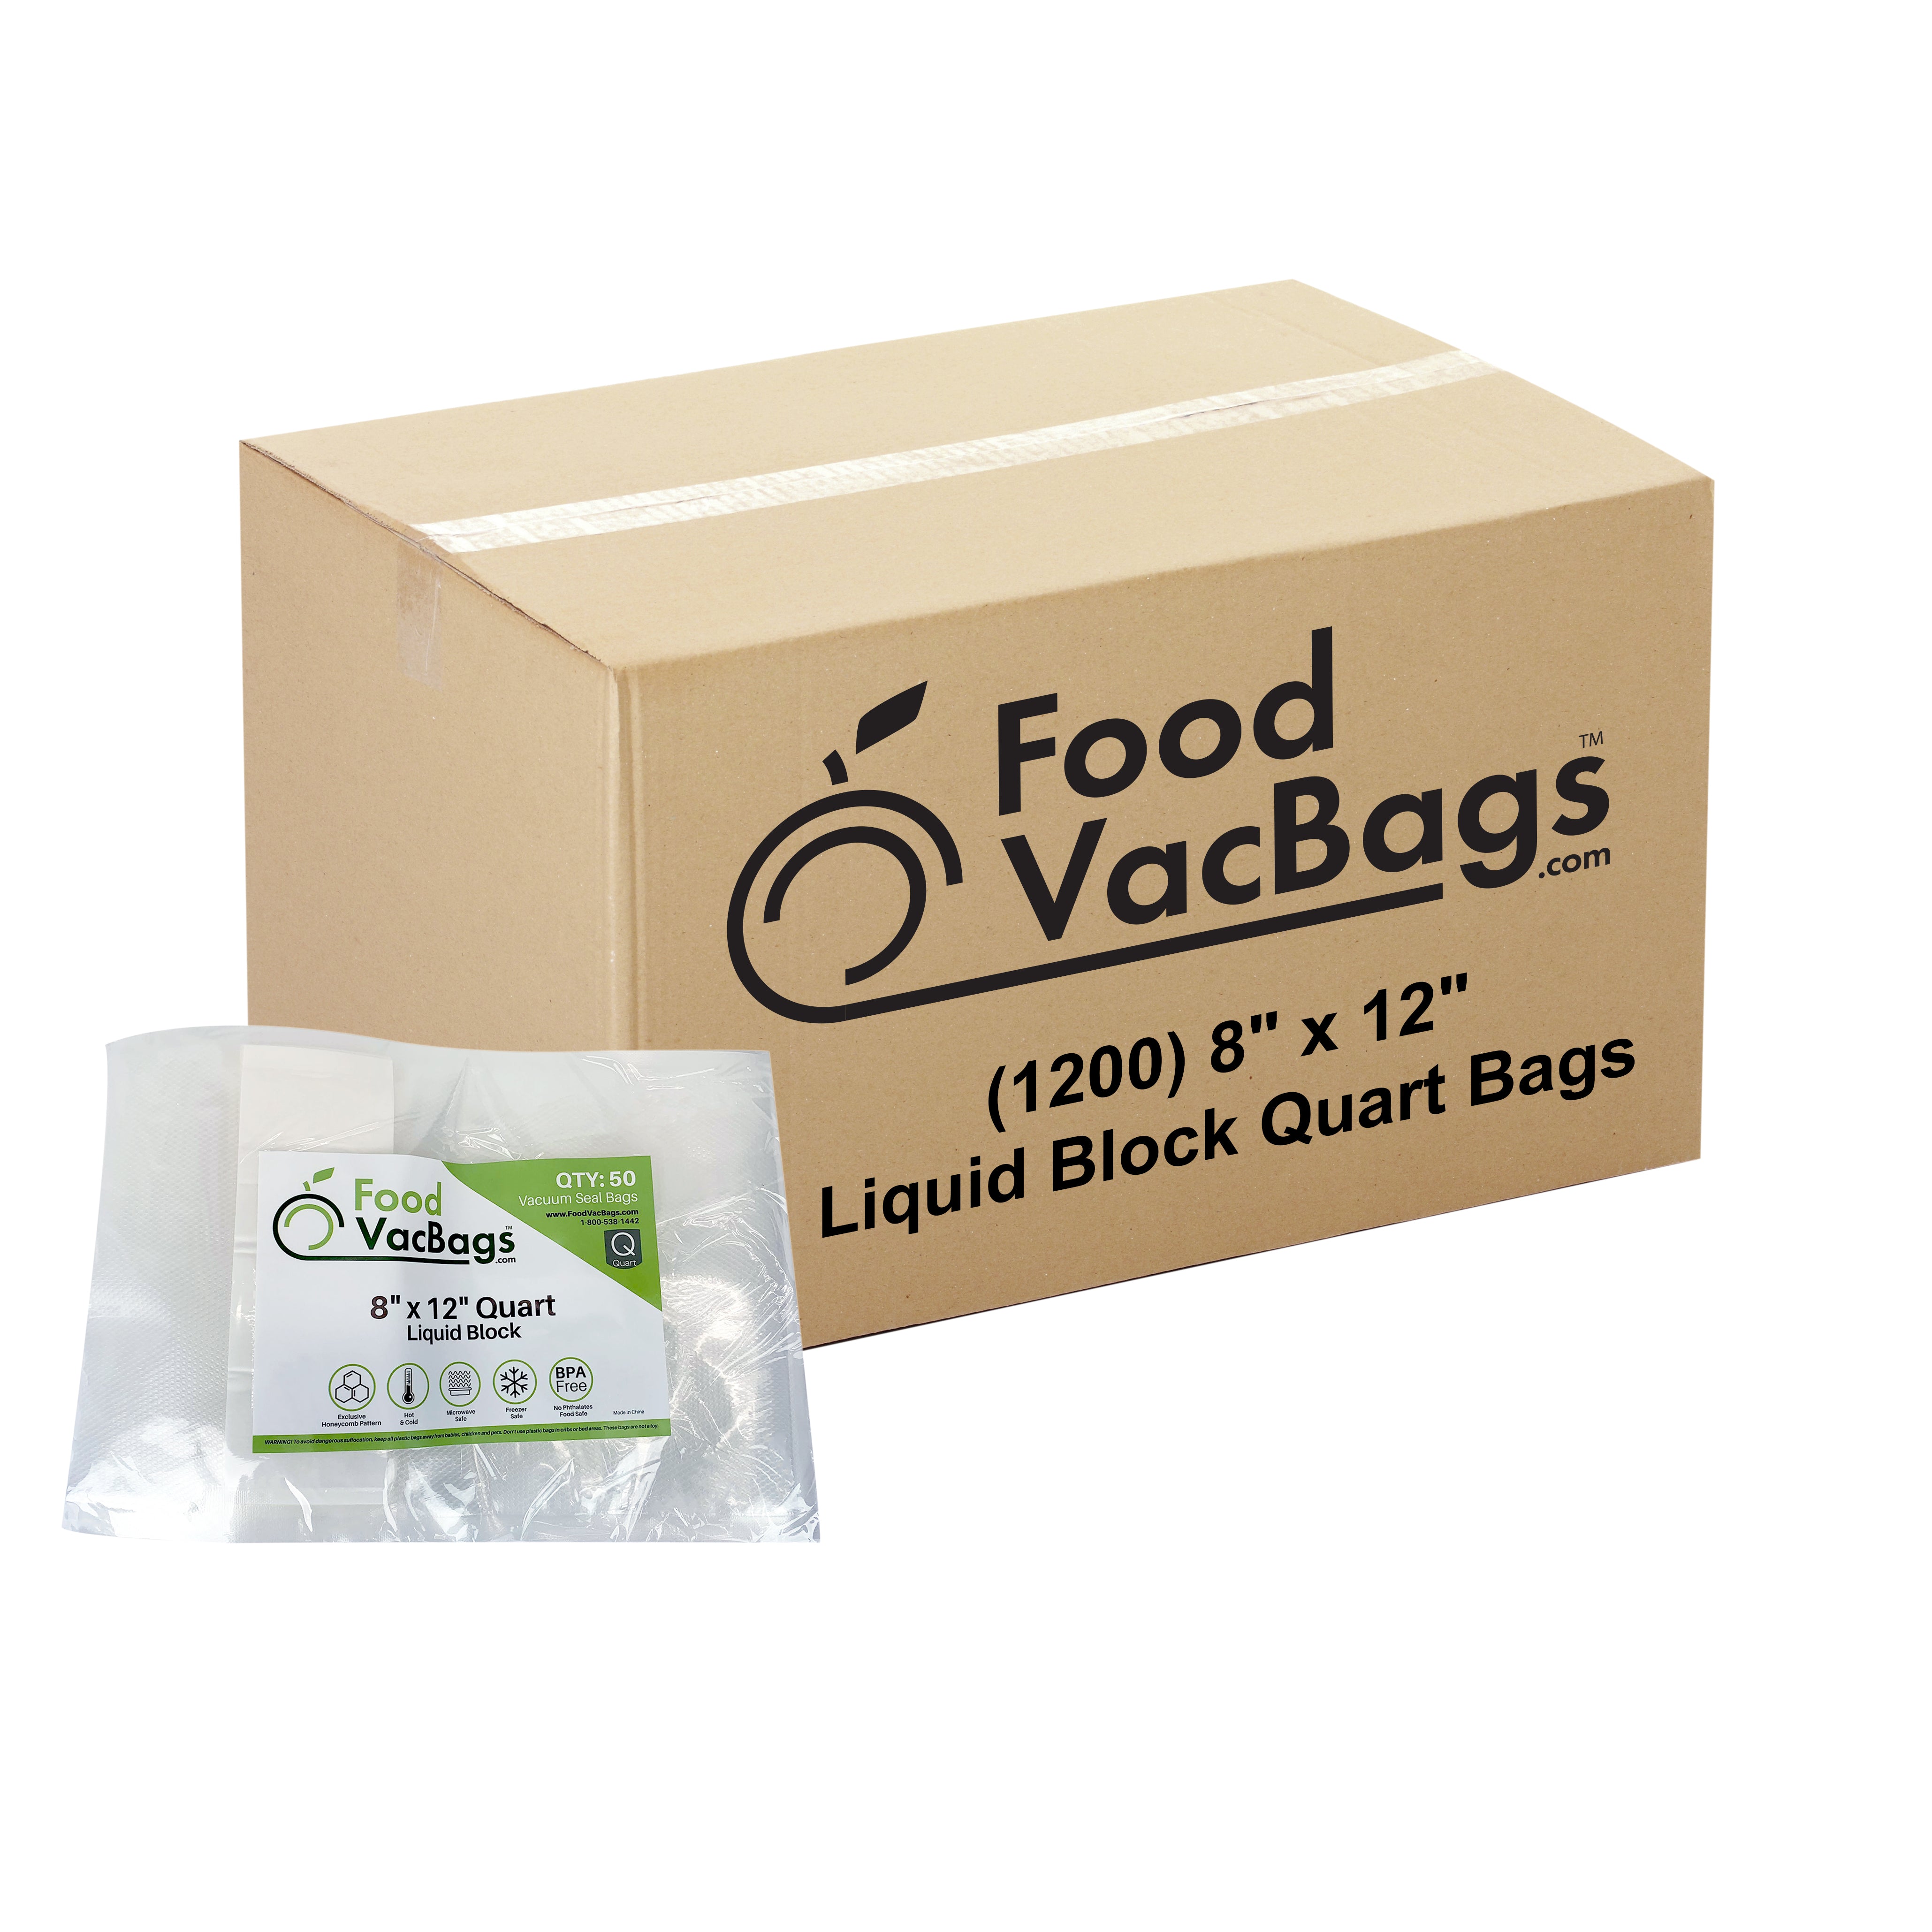 What to Keep in Vacuum-Sealed Bags